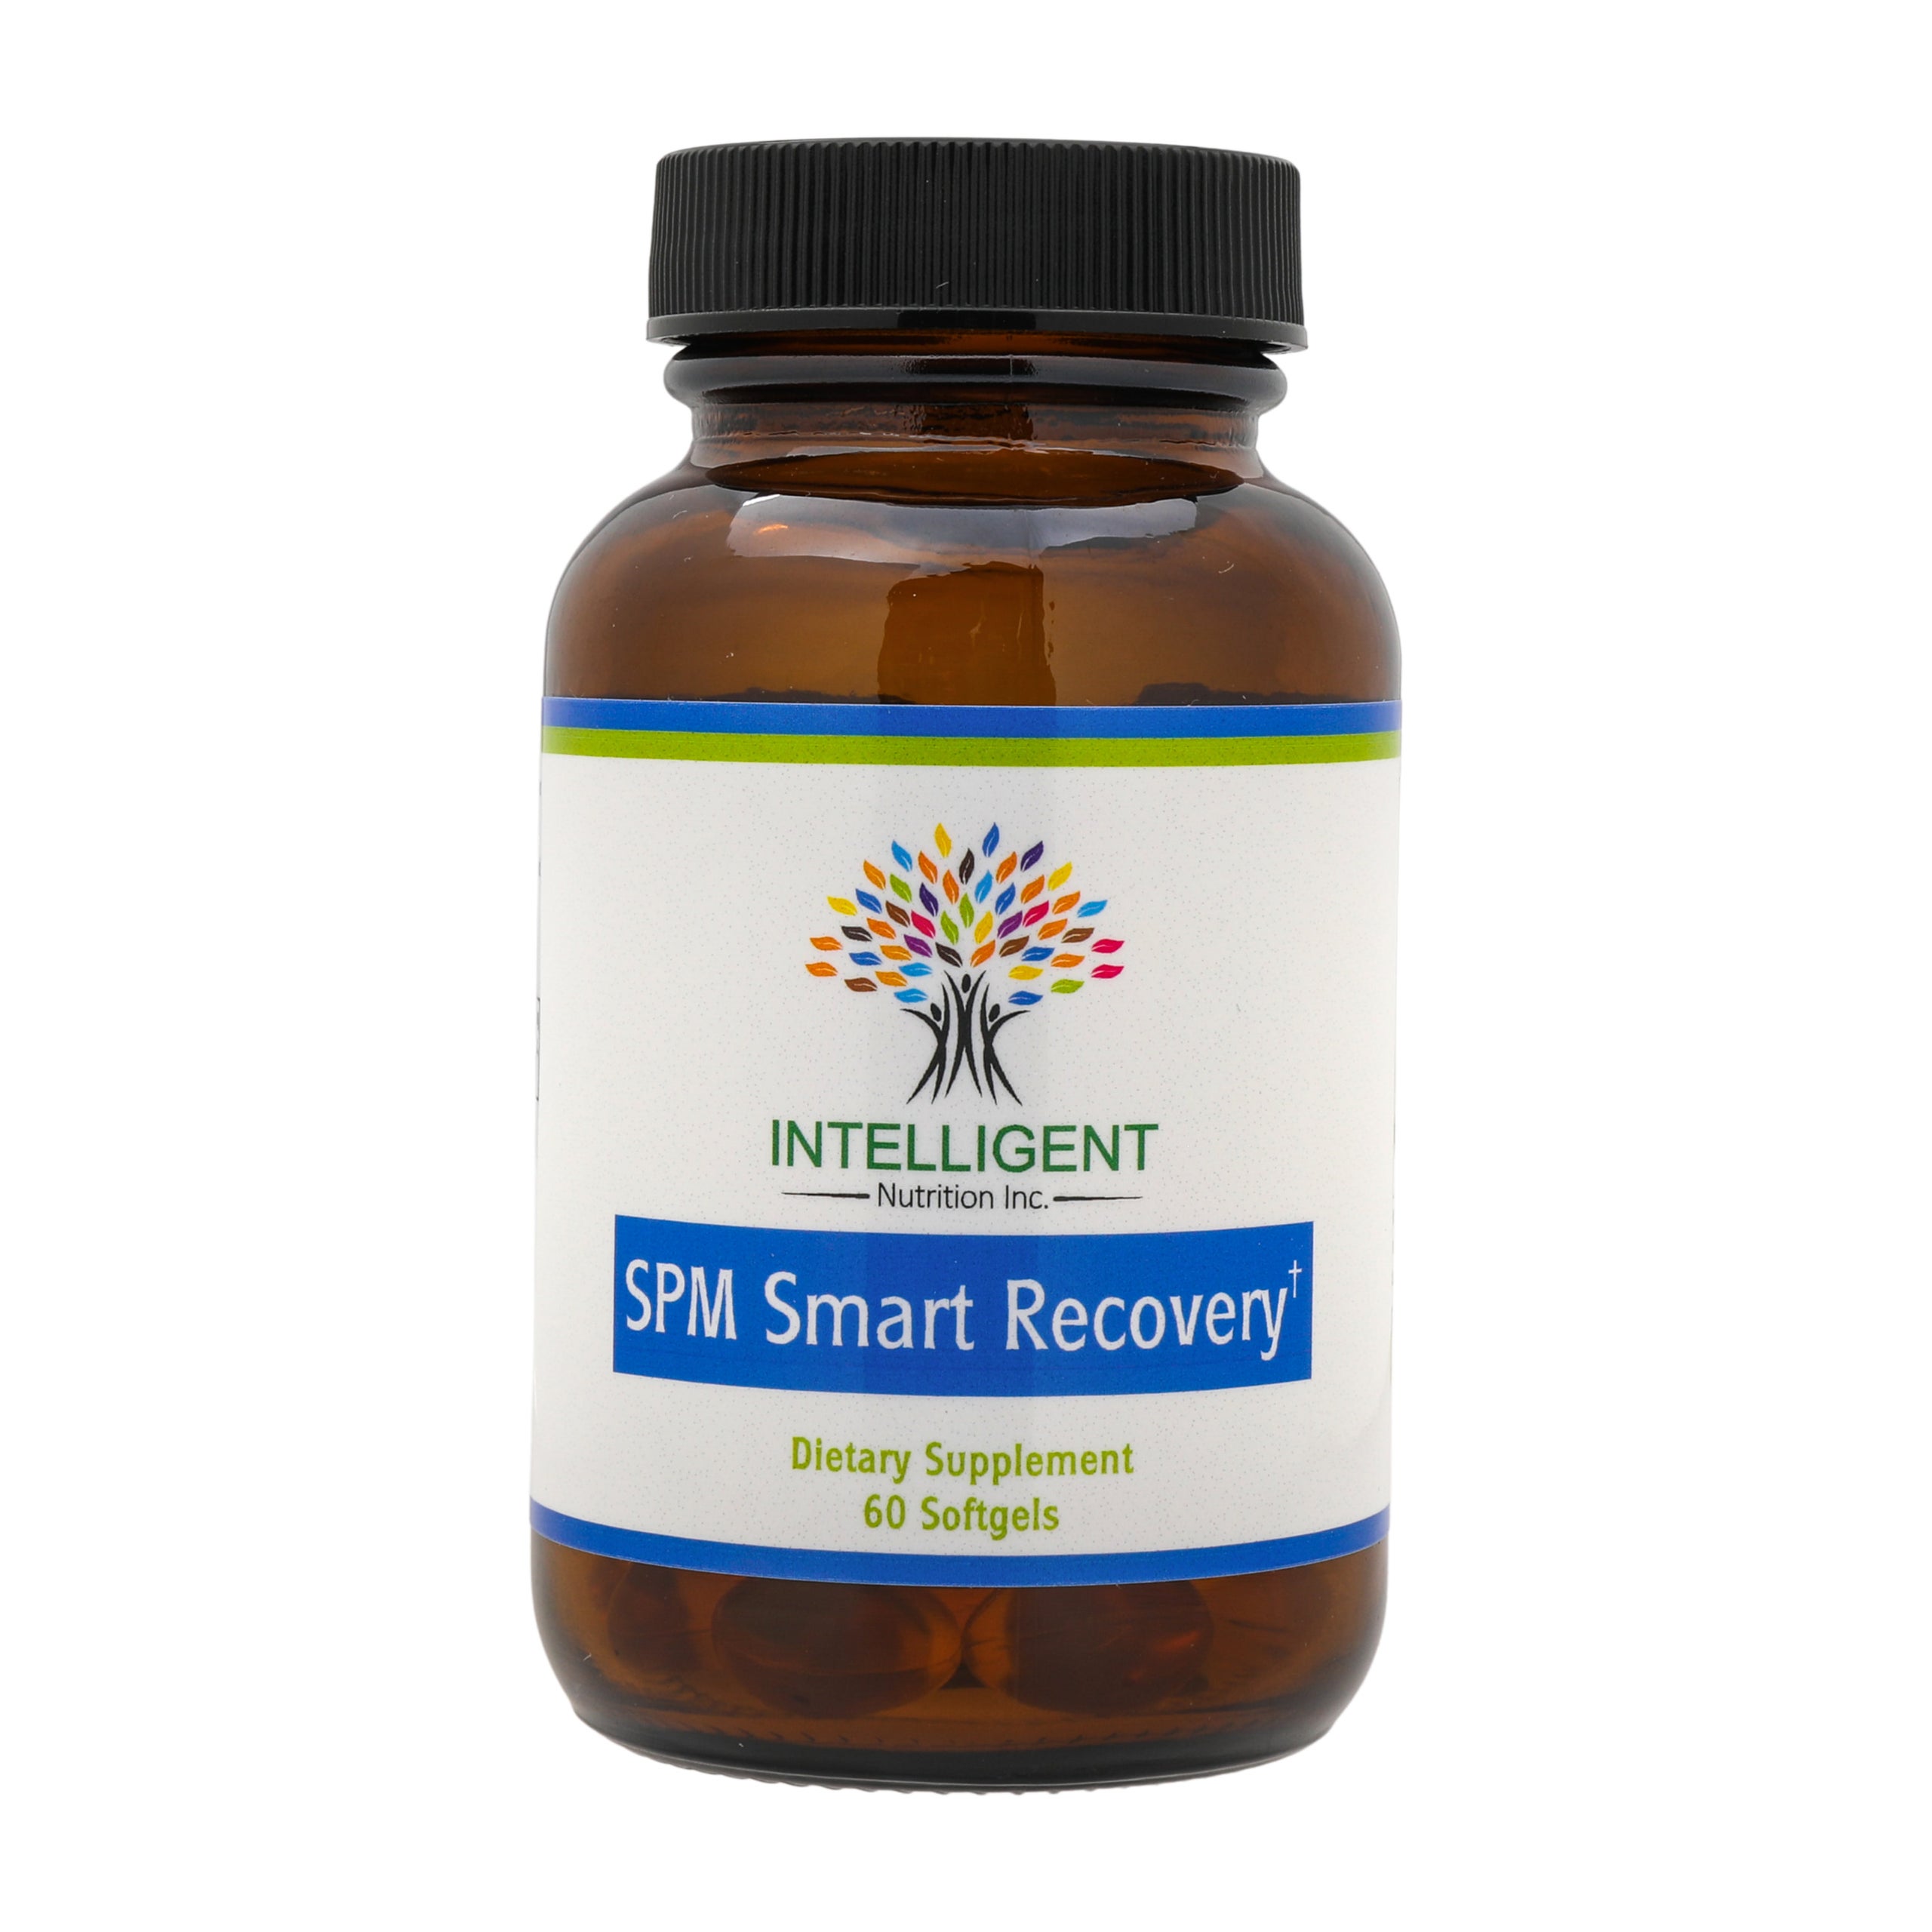 SPM Smart Recovery (60 softgels)